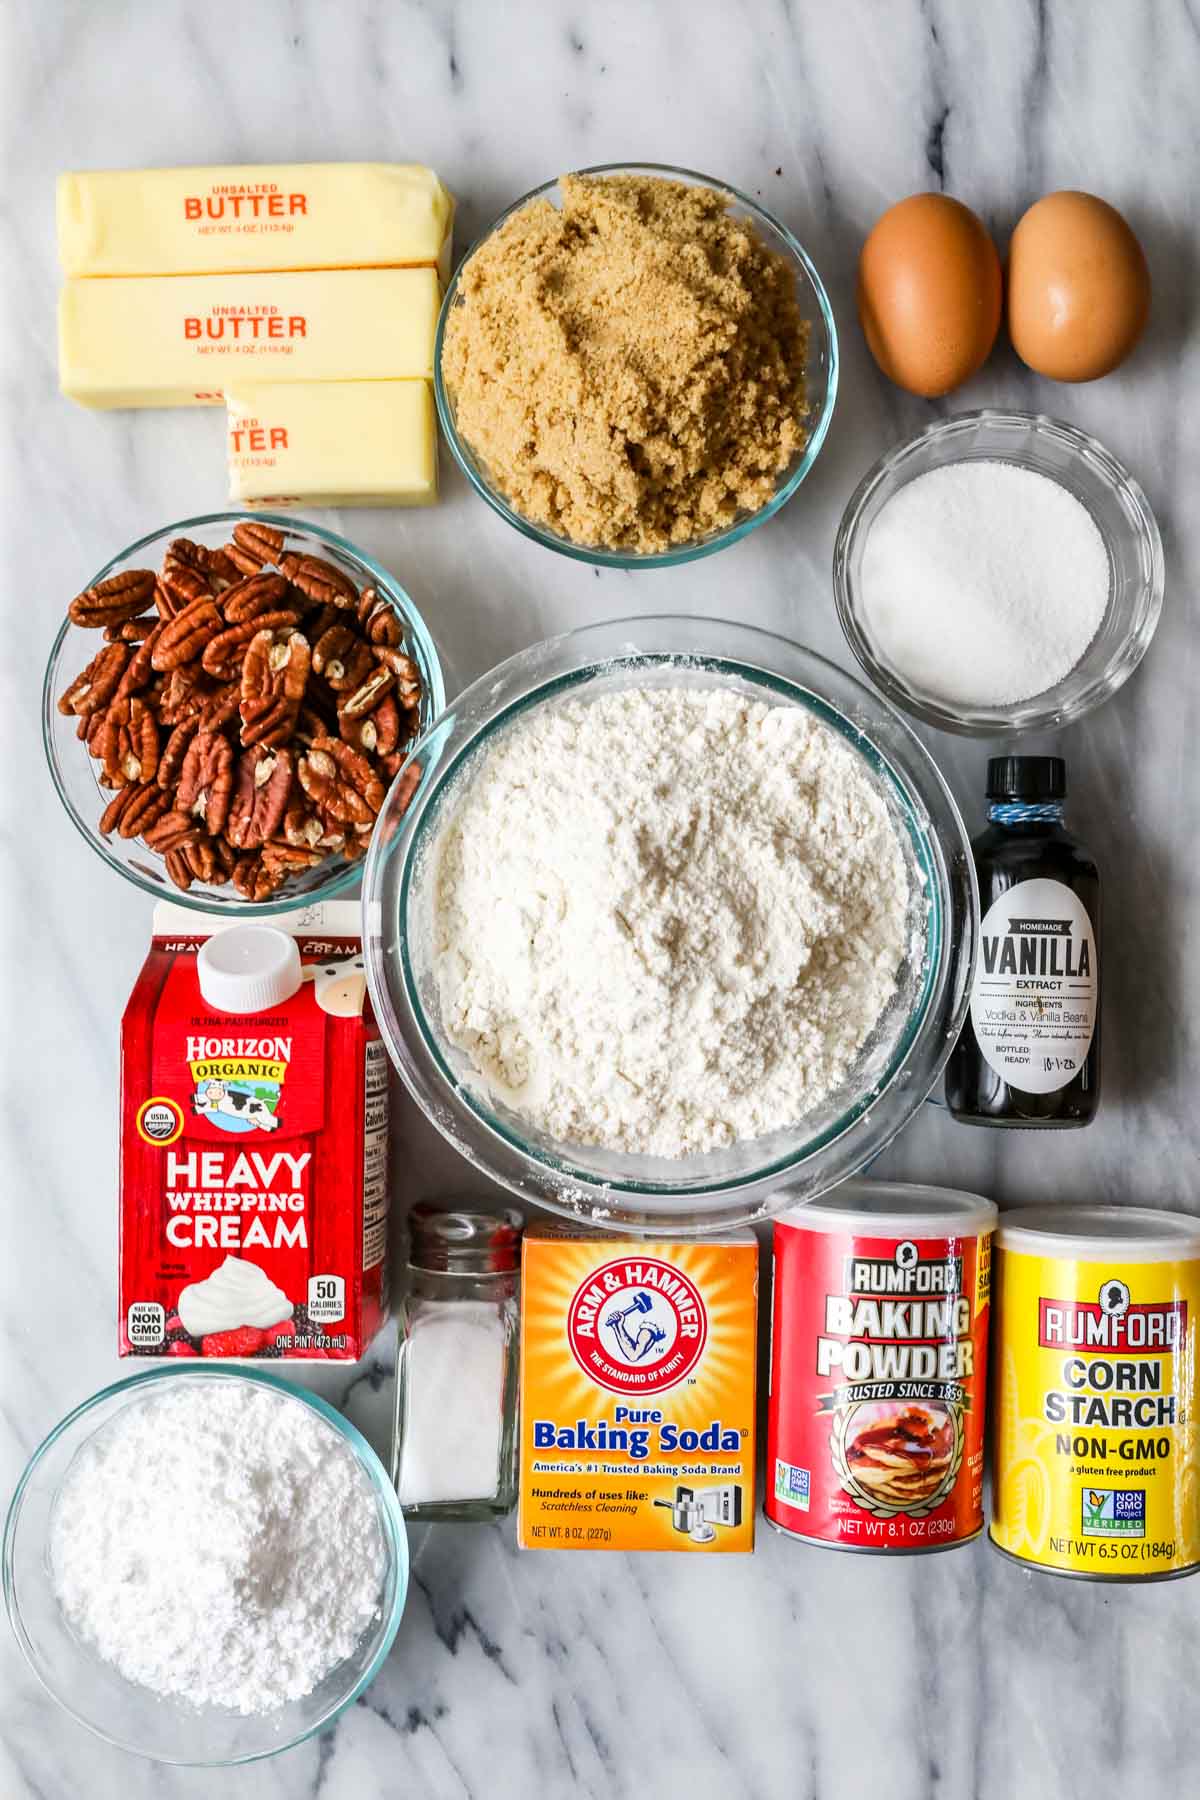 Overhead view of ingredients including pecans, brown sugar, eggs, and more. 